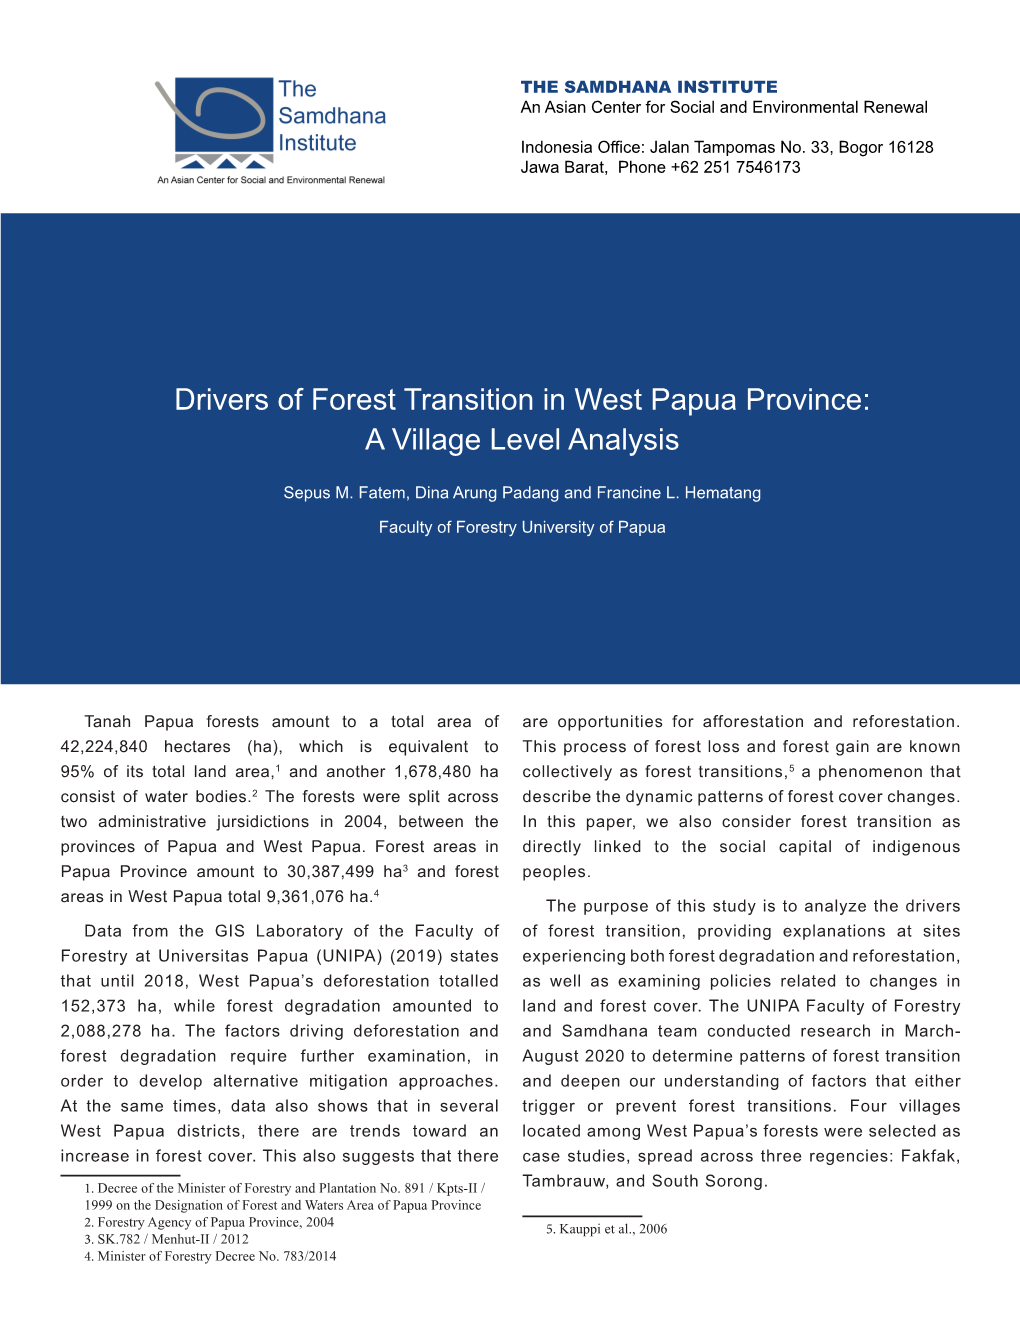 Drivers of Forest Transition in West Papua Province: a Village Level Analysis